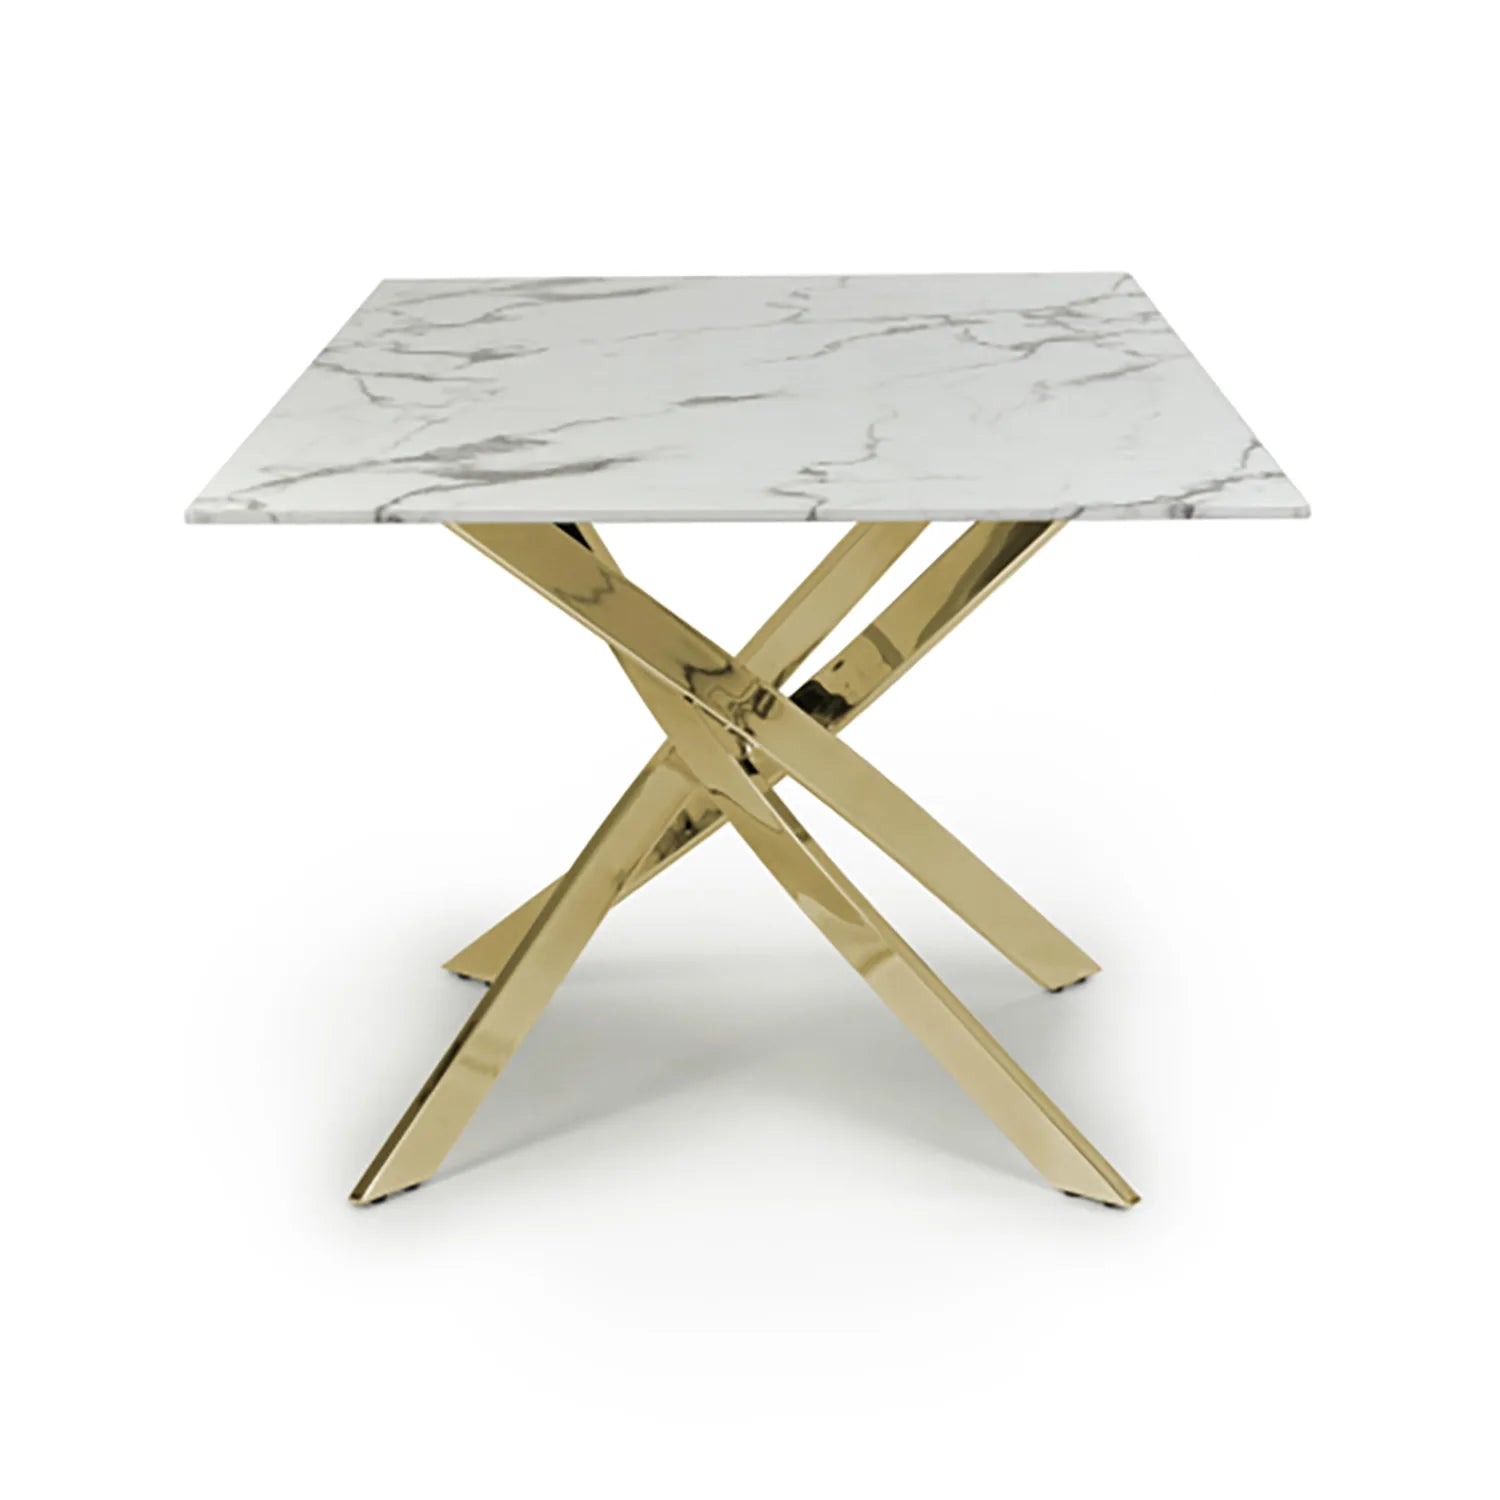 Aston 1.6M White Marble Effect Dining Table - Gold Base